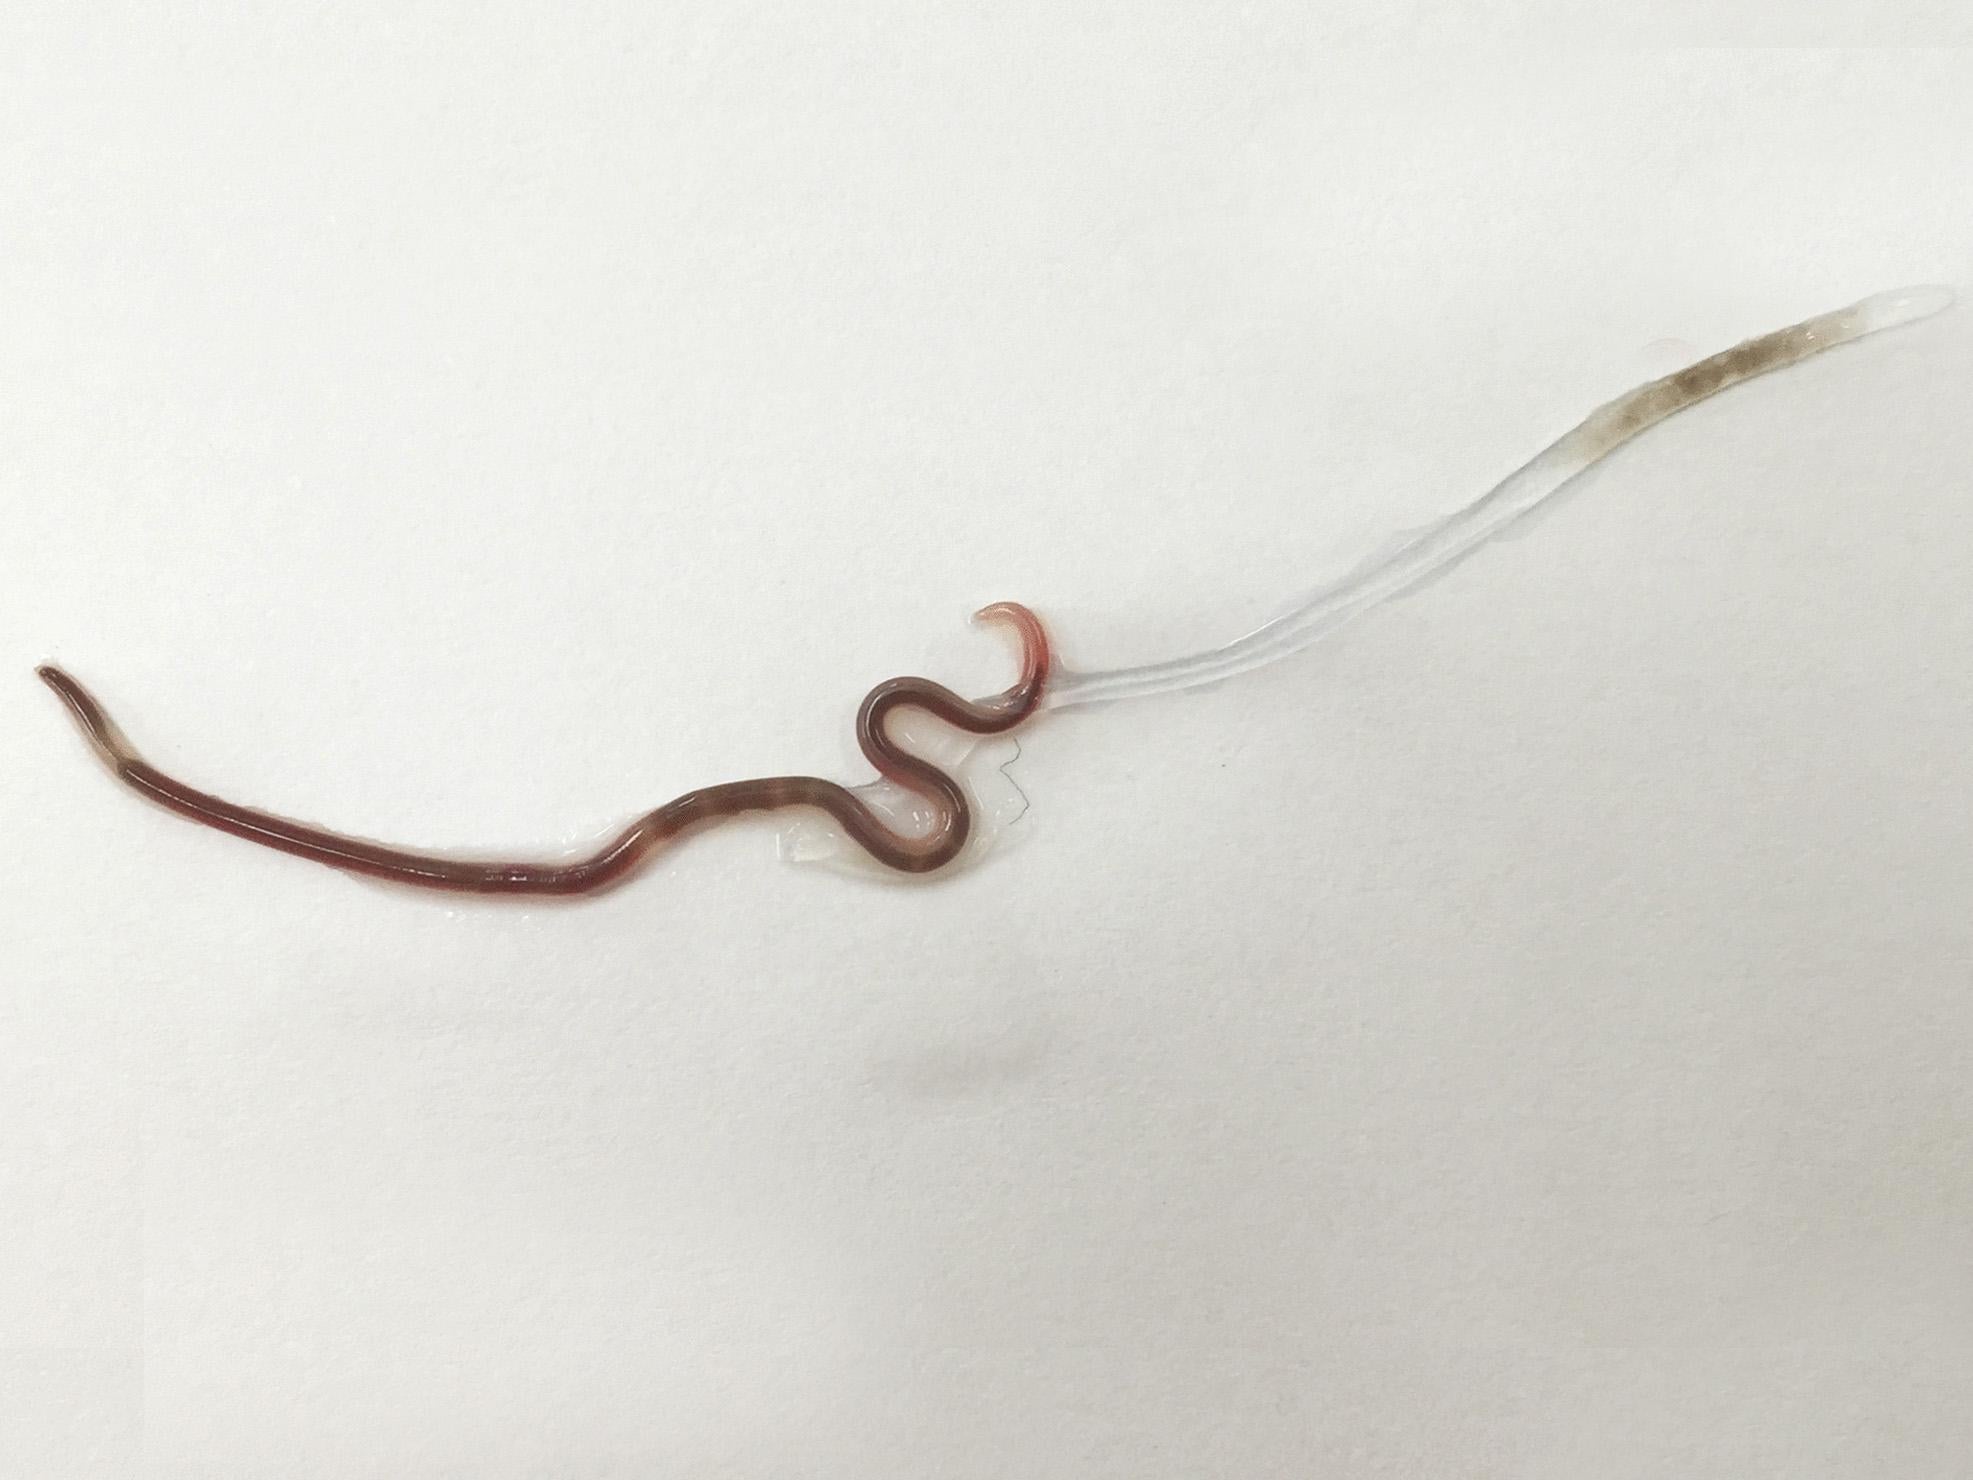 Worm found living in woman's tonsil for nearly a week, The Independent